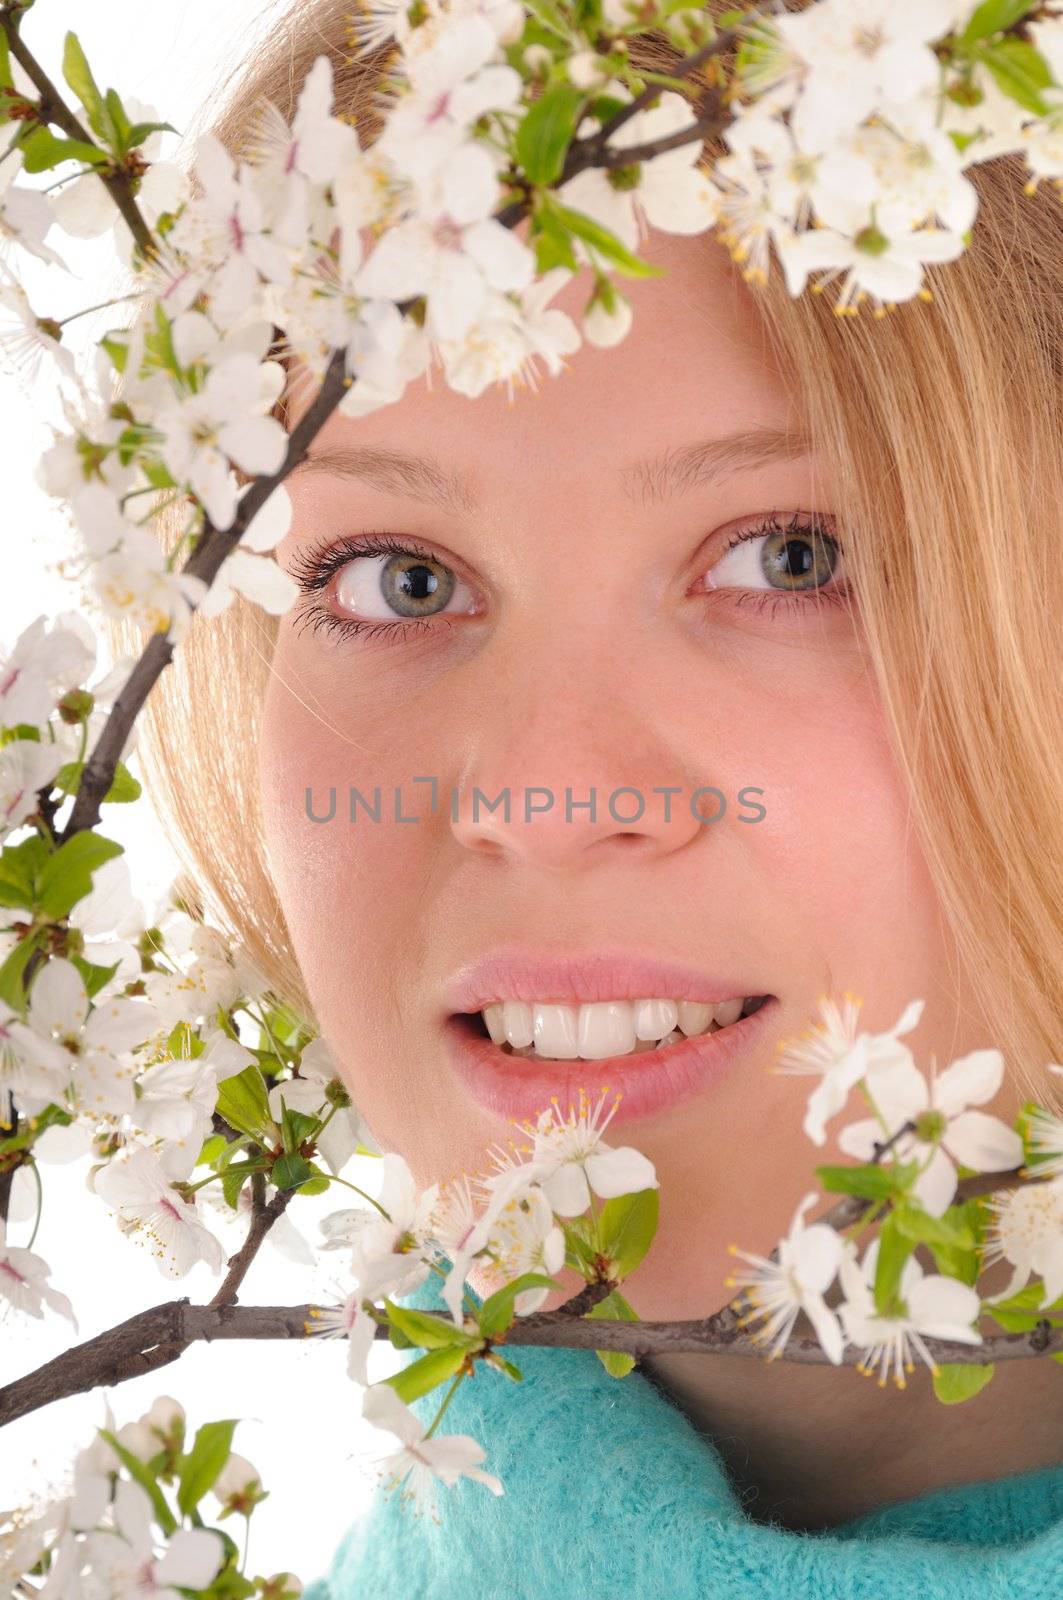 Smiling blonde woman behind spring white cherry flowers. Focus on woman's eyes.